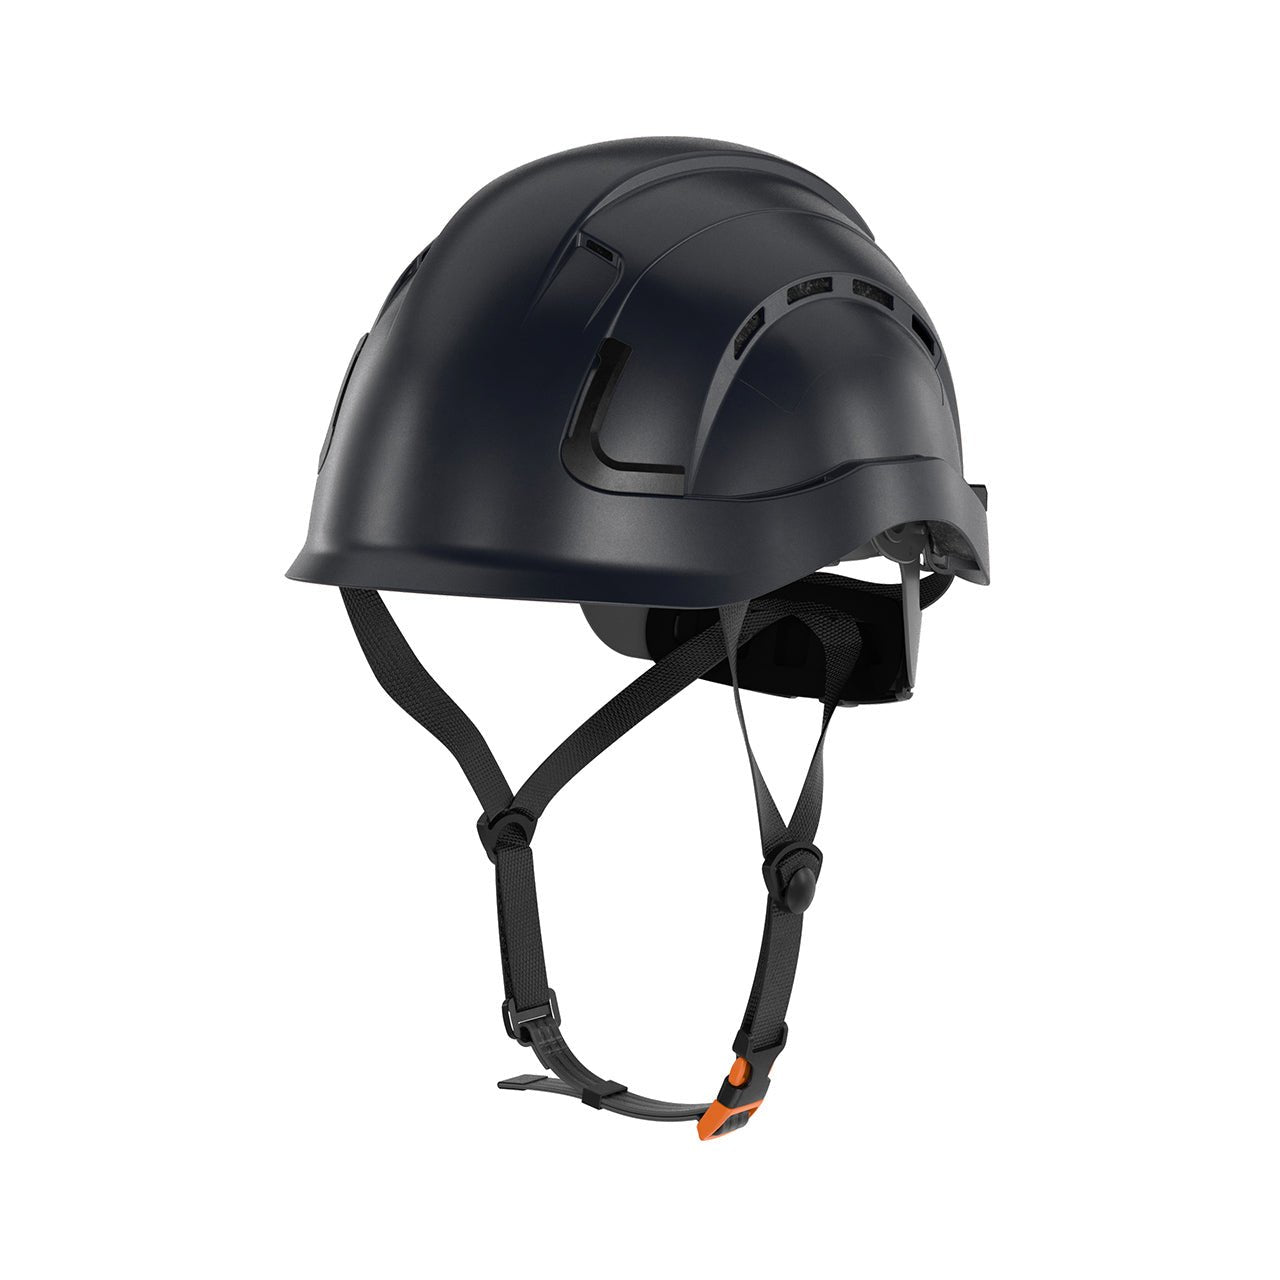 H2-CH Safety Helmet Type 2 Class C, ANSI Z89 and EN12492 rated - Defender Safety